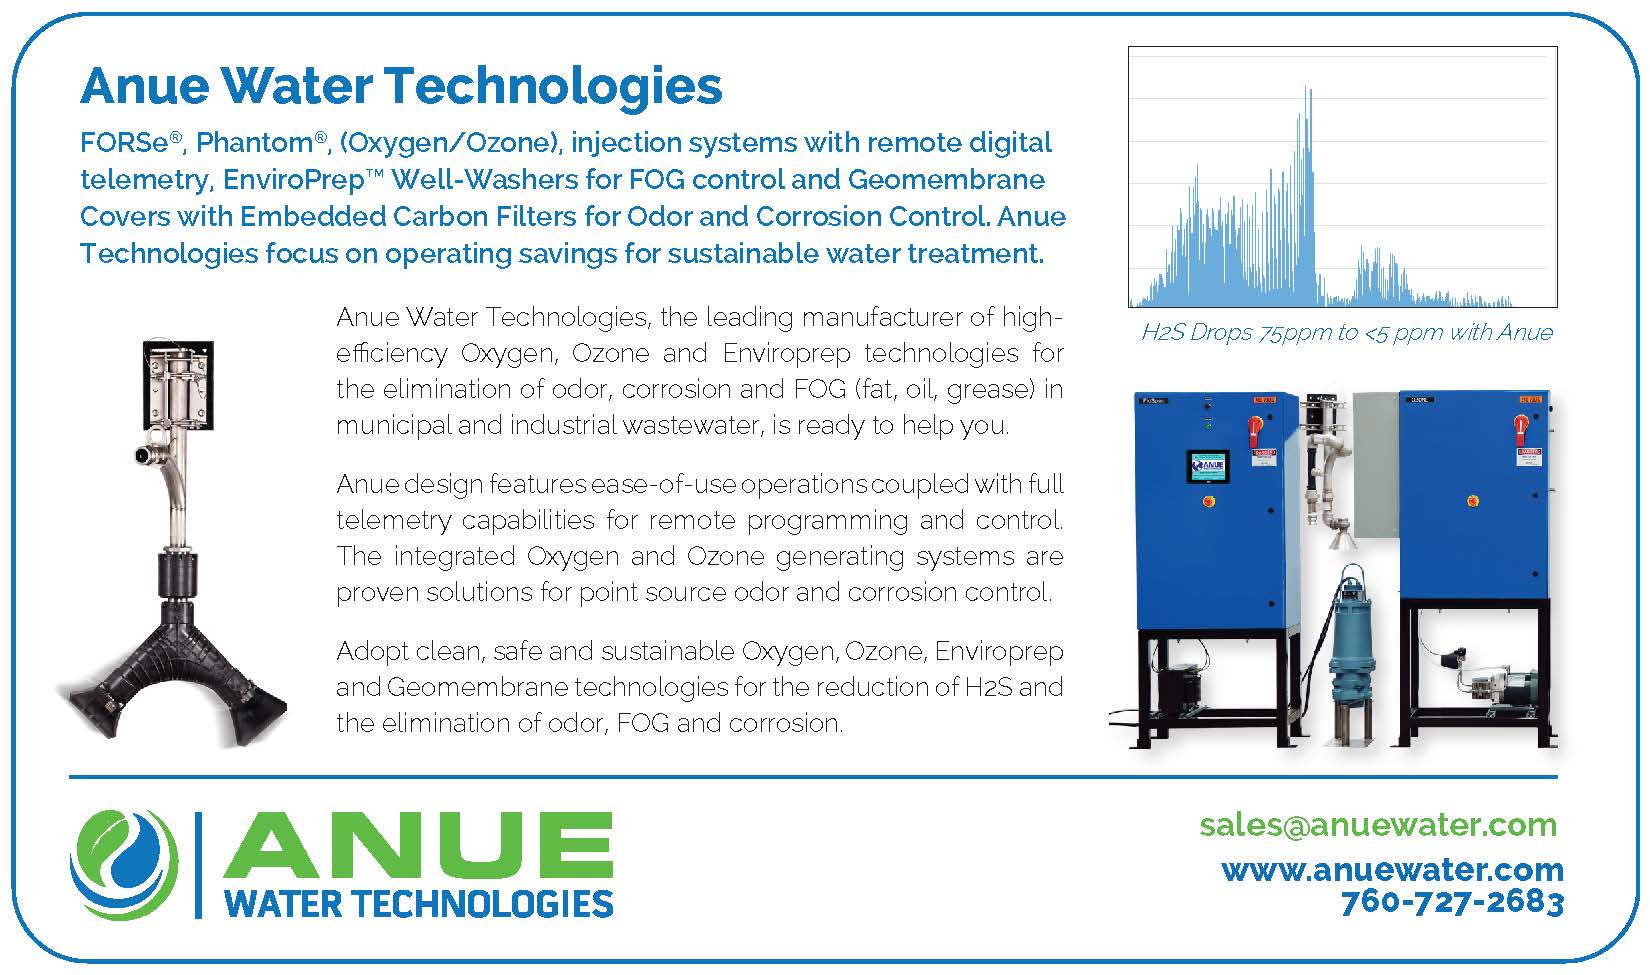 Anue Water Technologies Wastewater Treatment Services Ad 2021